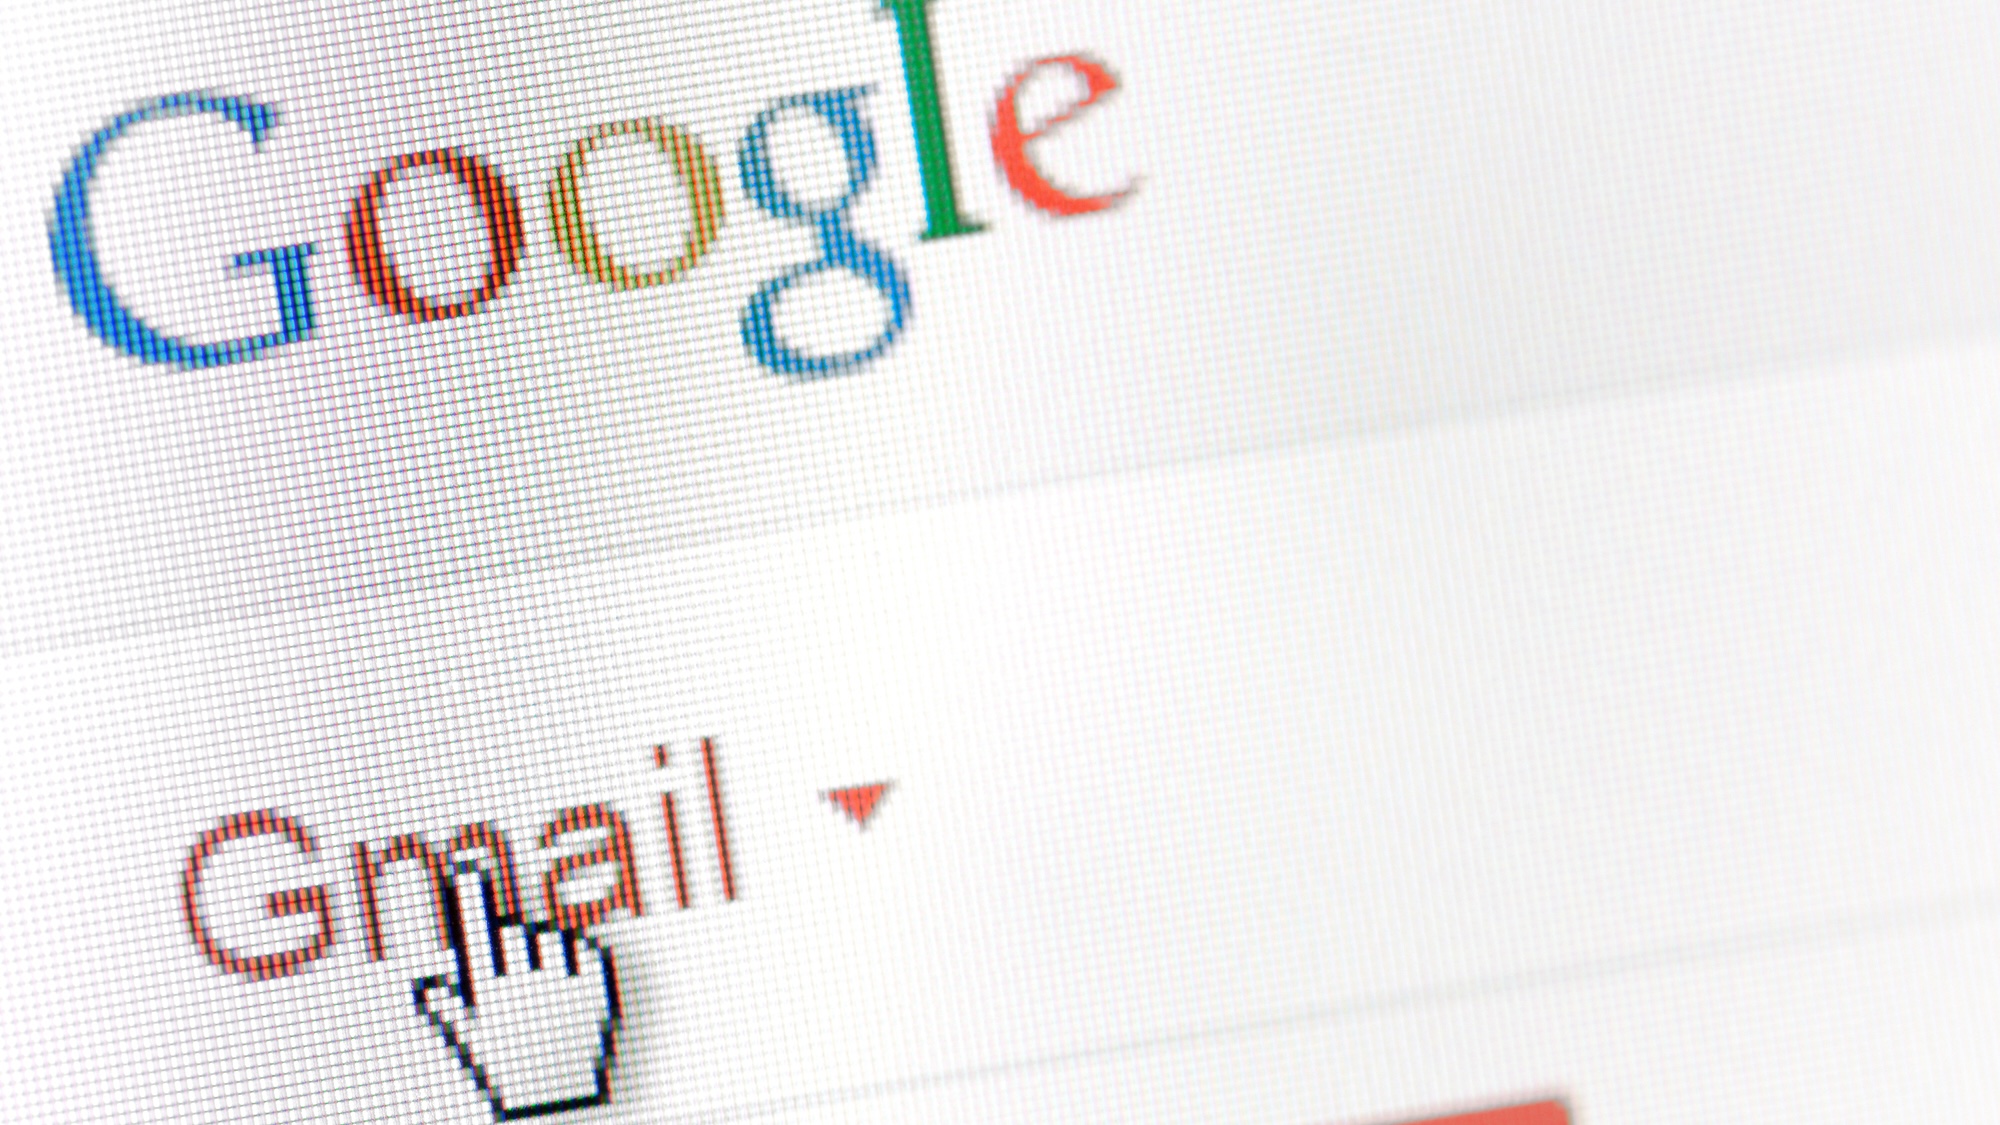 Gmail debuted on April Fool’s Day 20 years ago. The joke is still on us.